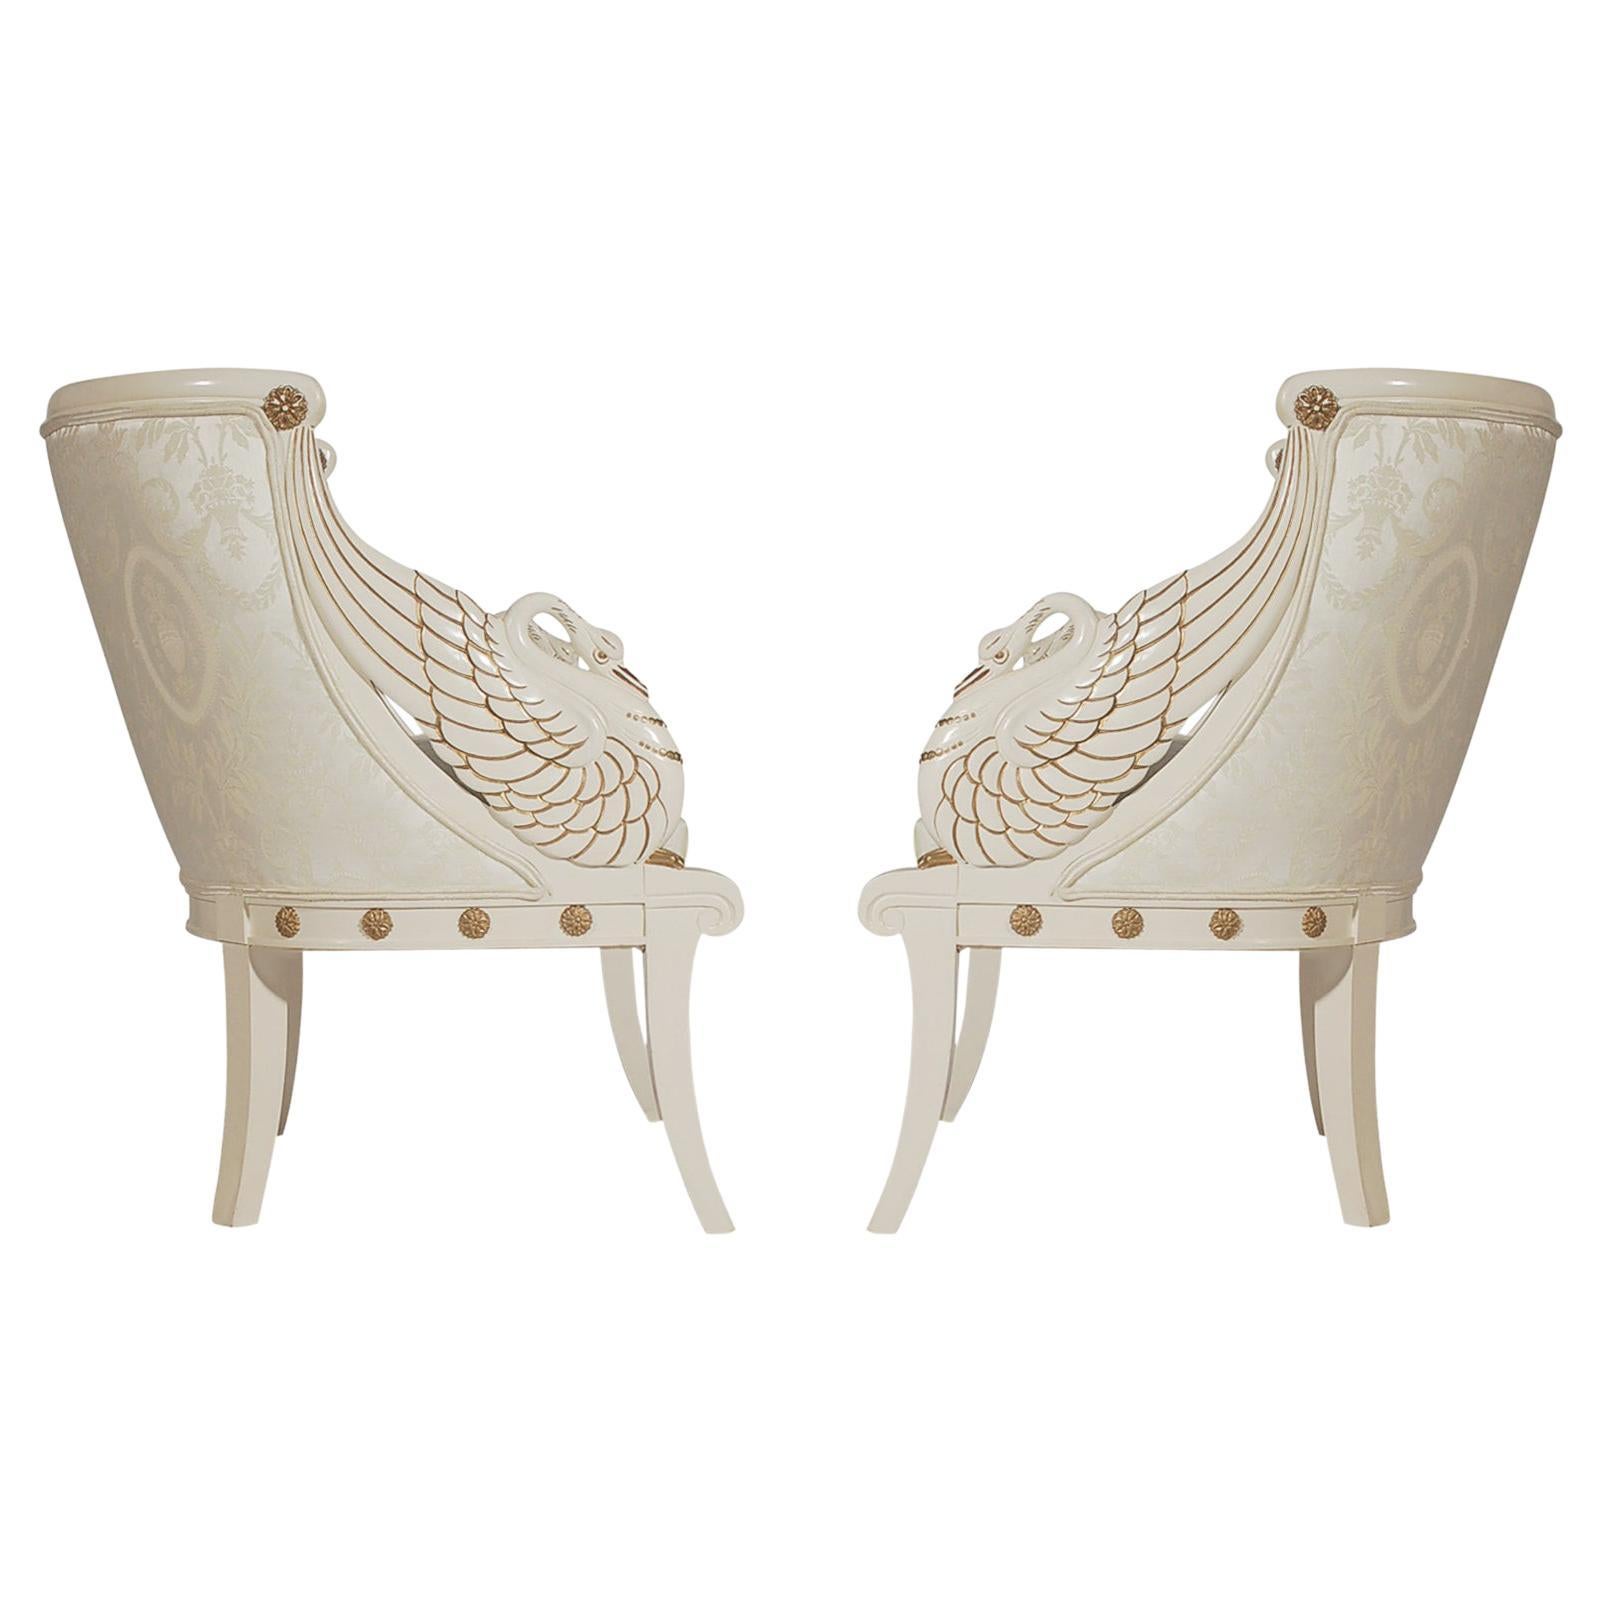 Matching Pair of Neoclassical Lacquered Carved Swan Armchair Lounge Chairs